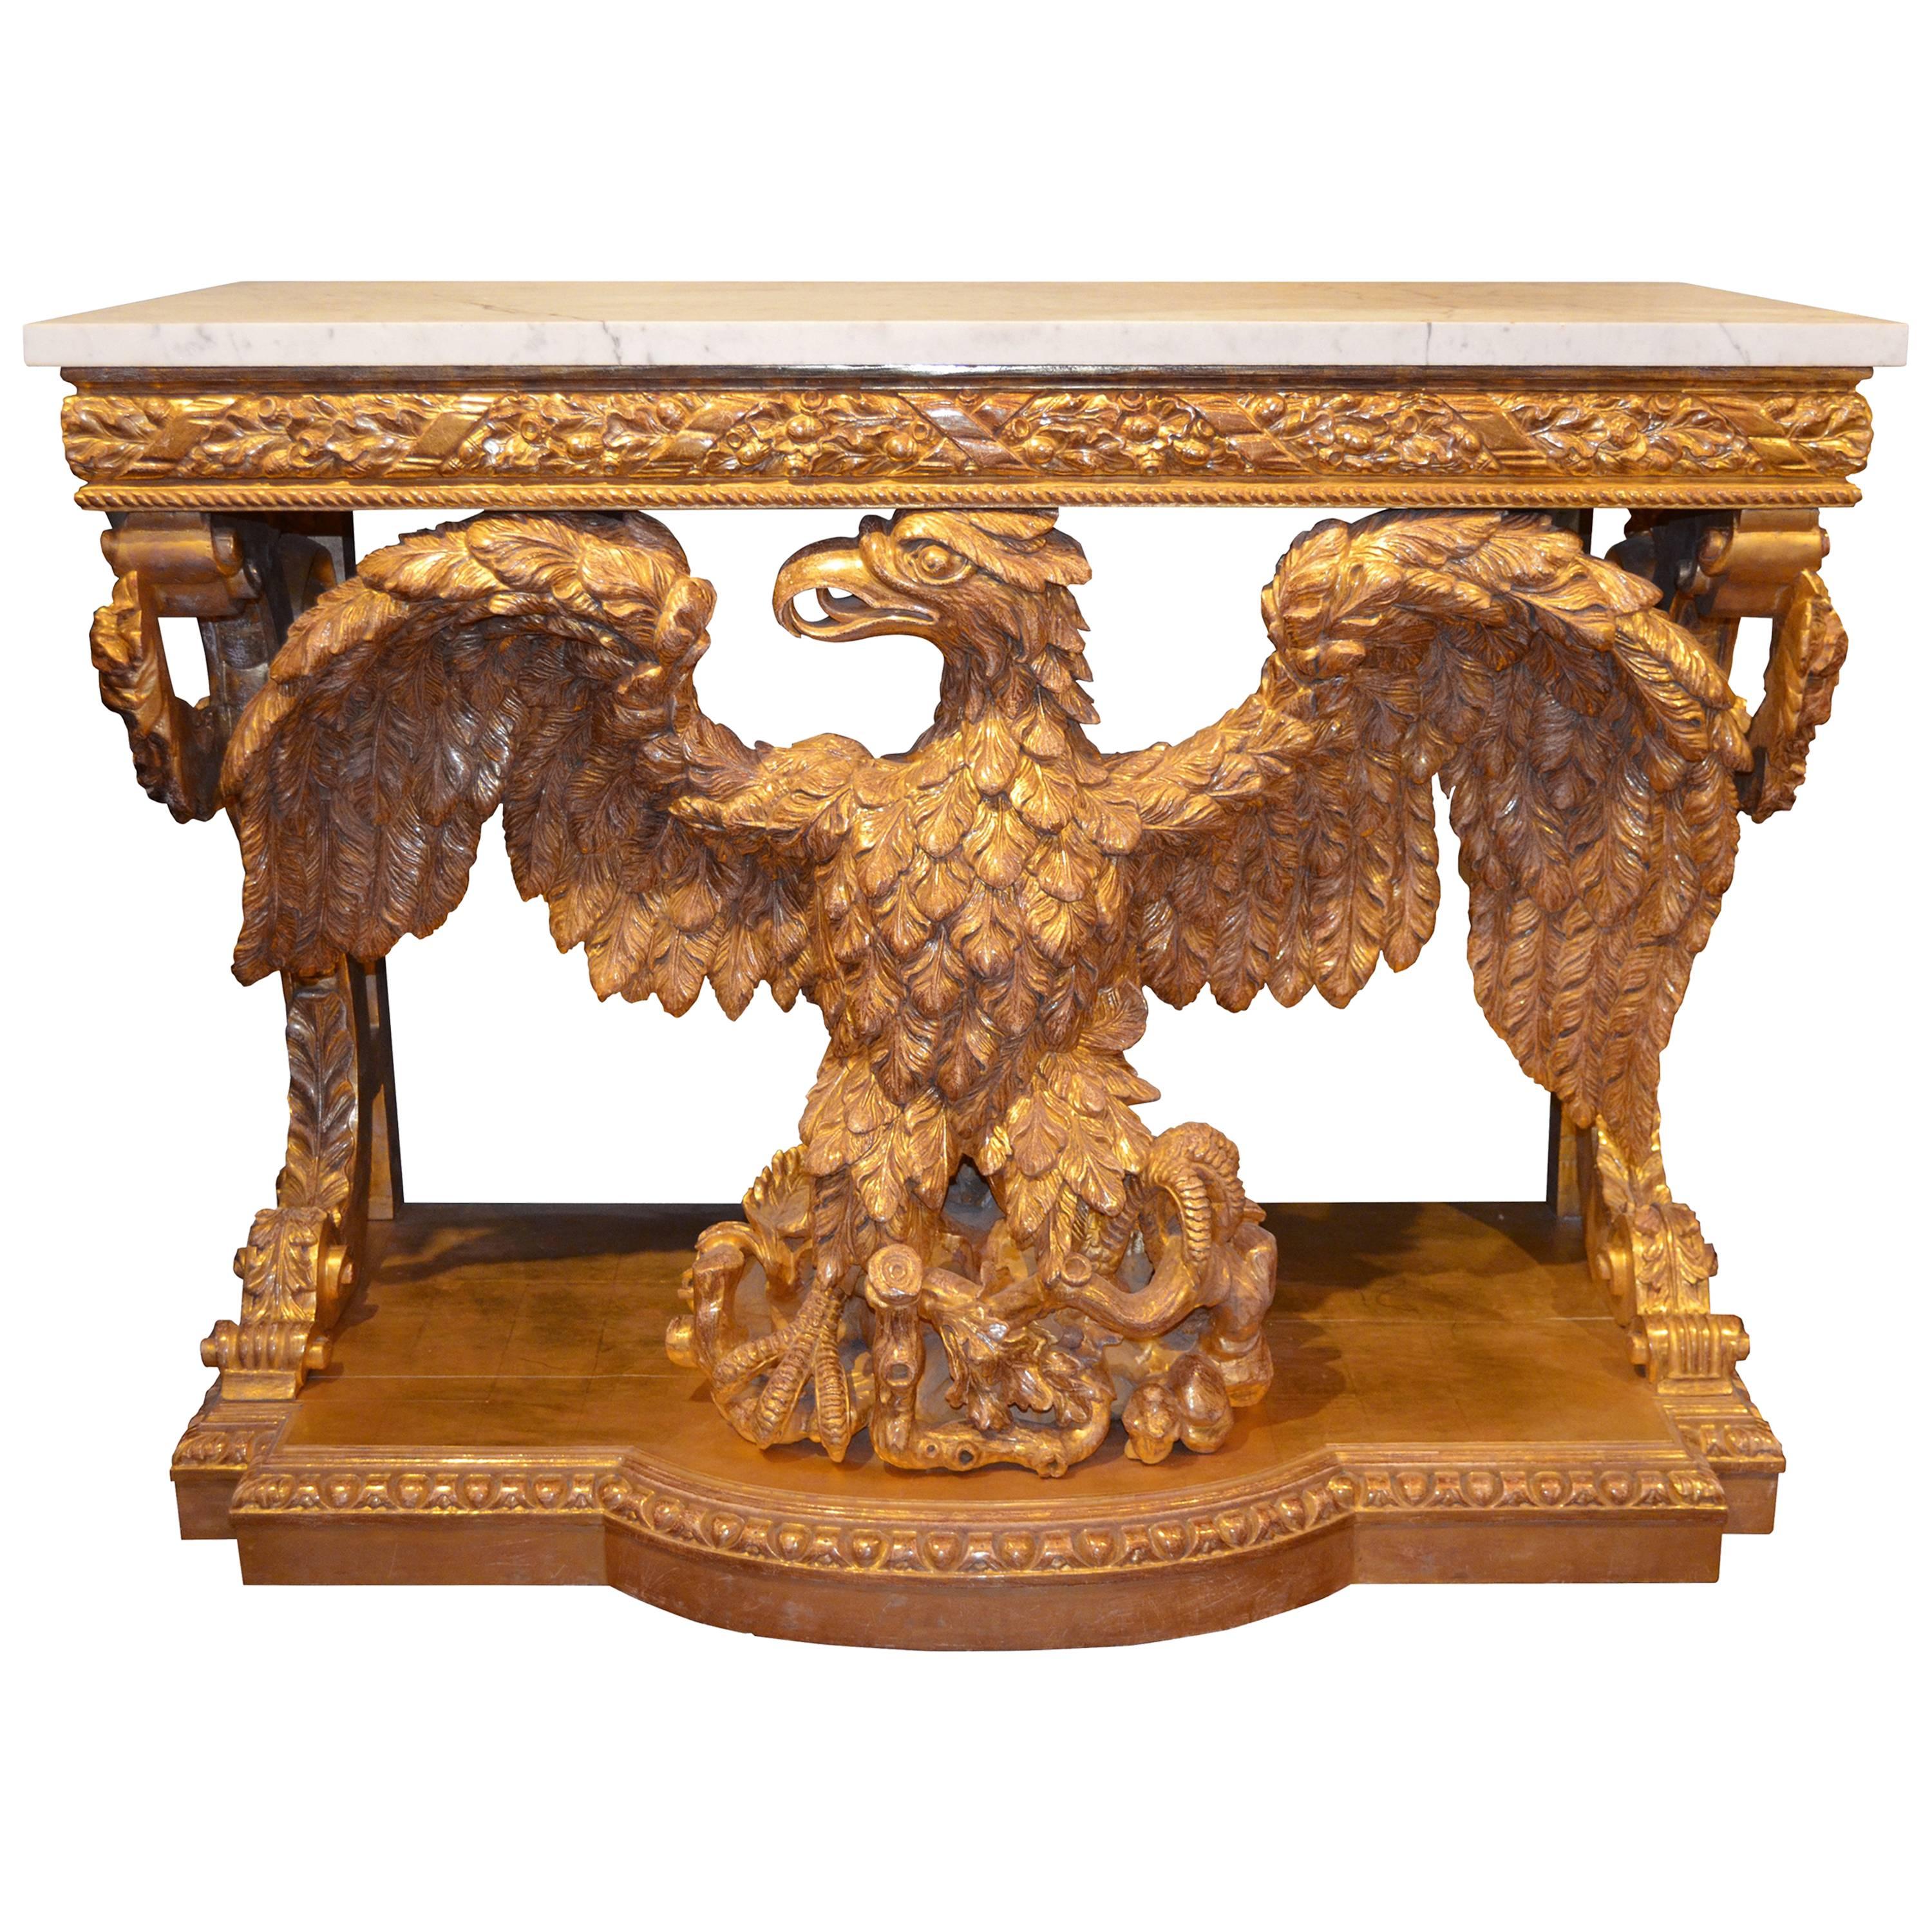 Pair of William Kent Design Carved Giltwood Eagle Consoles